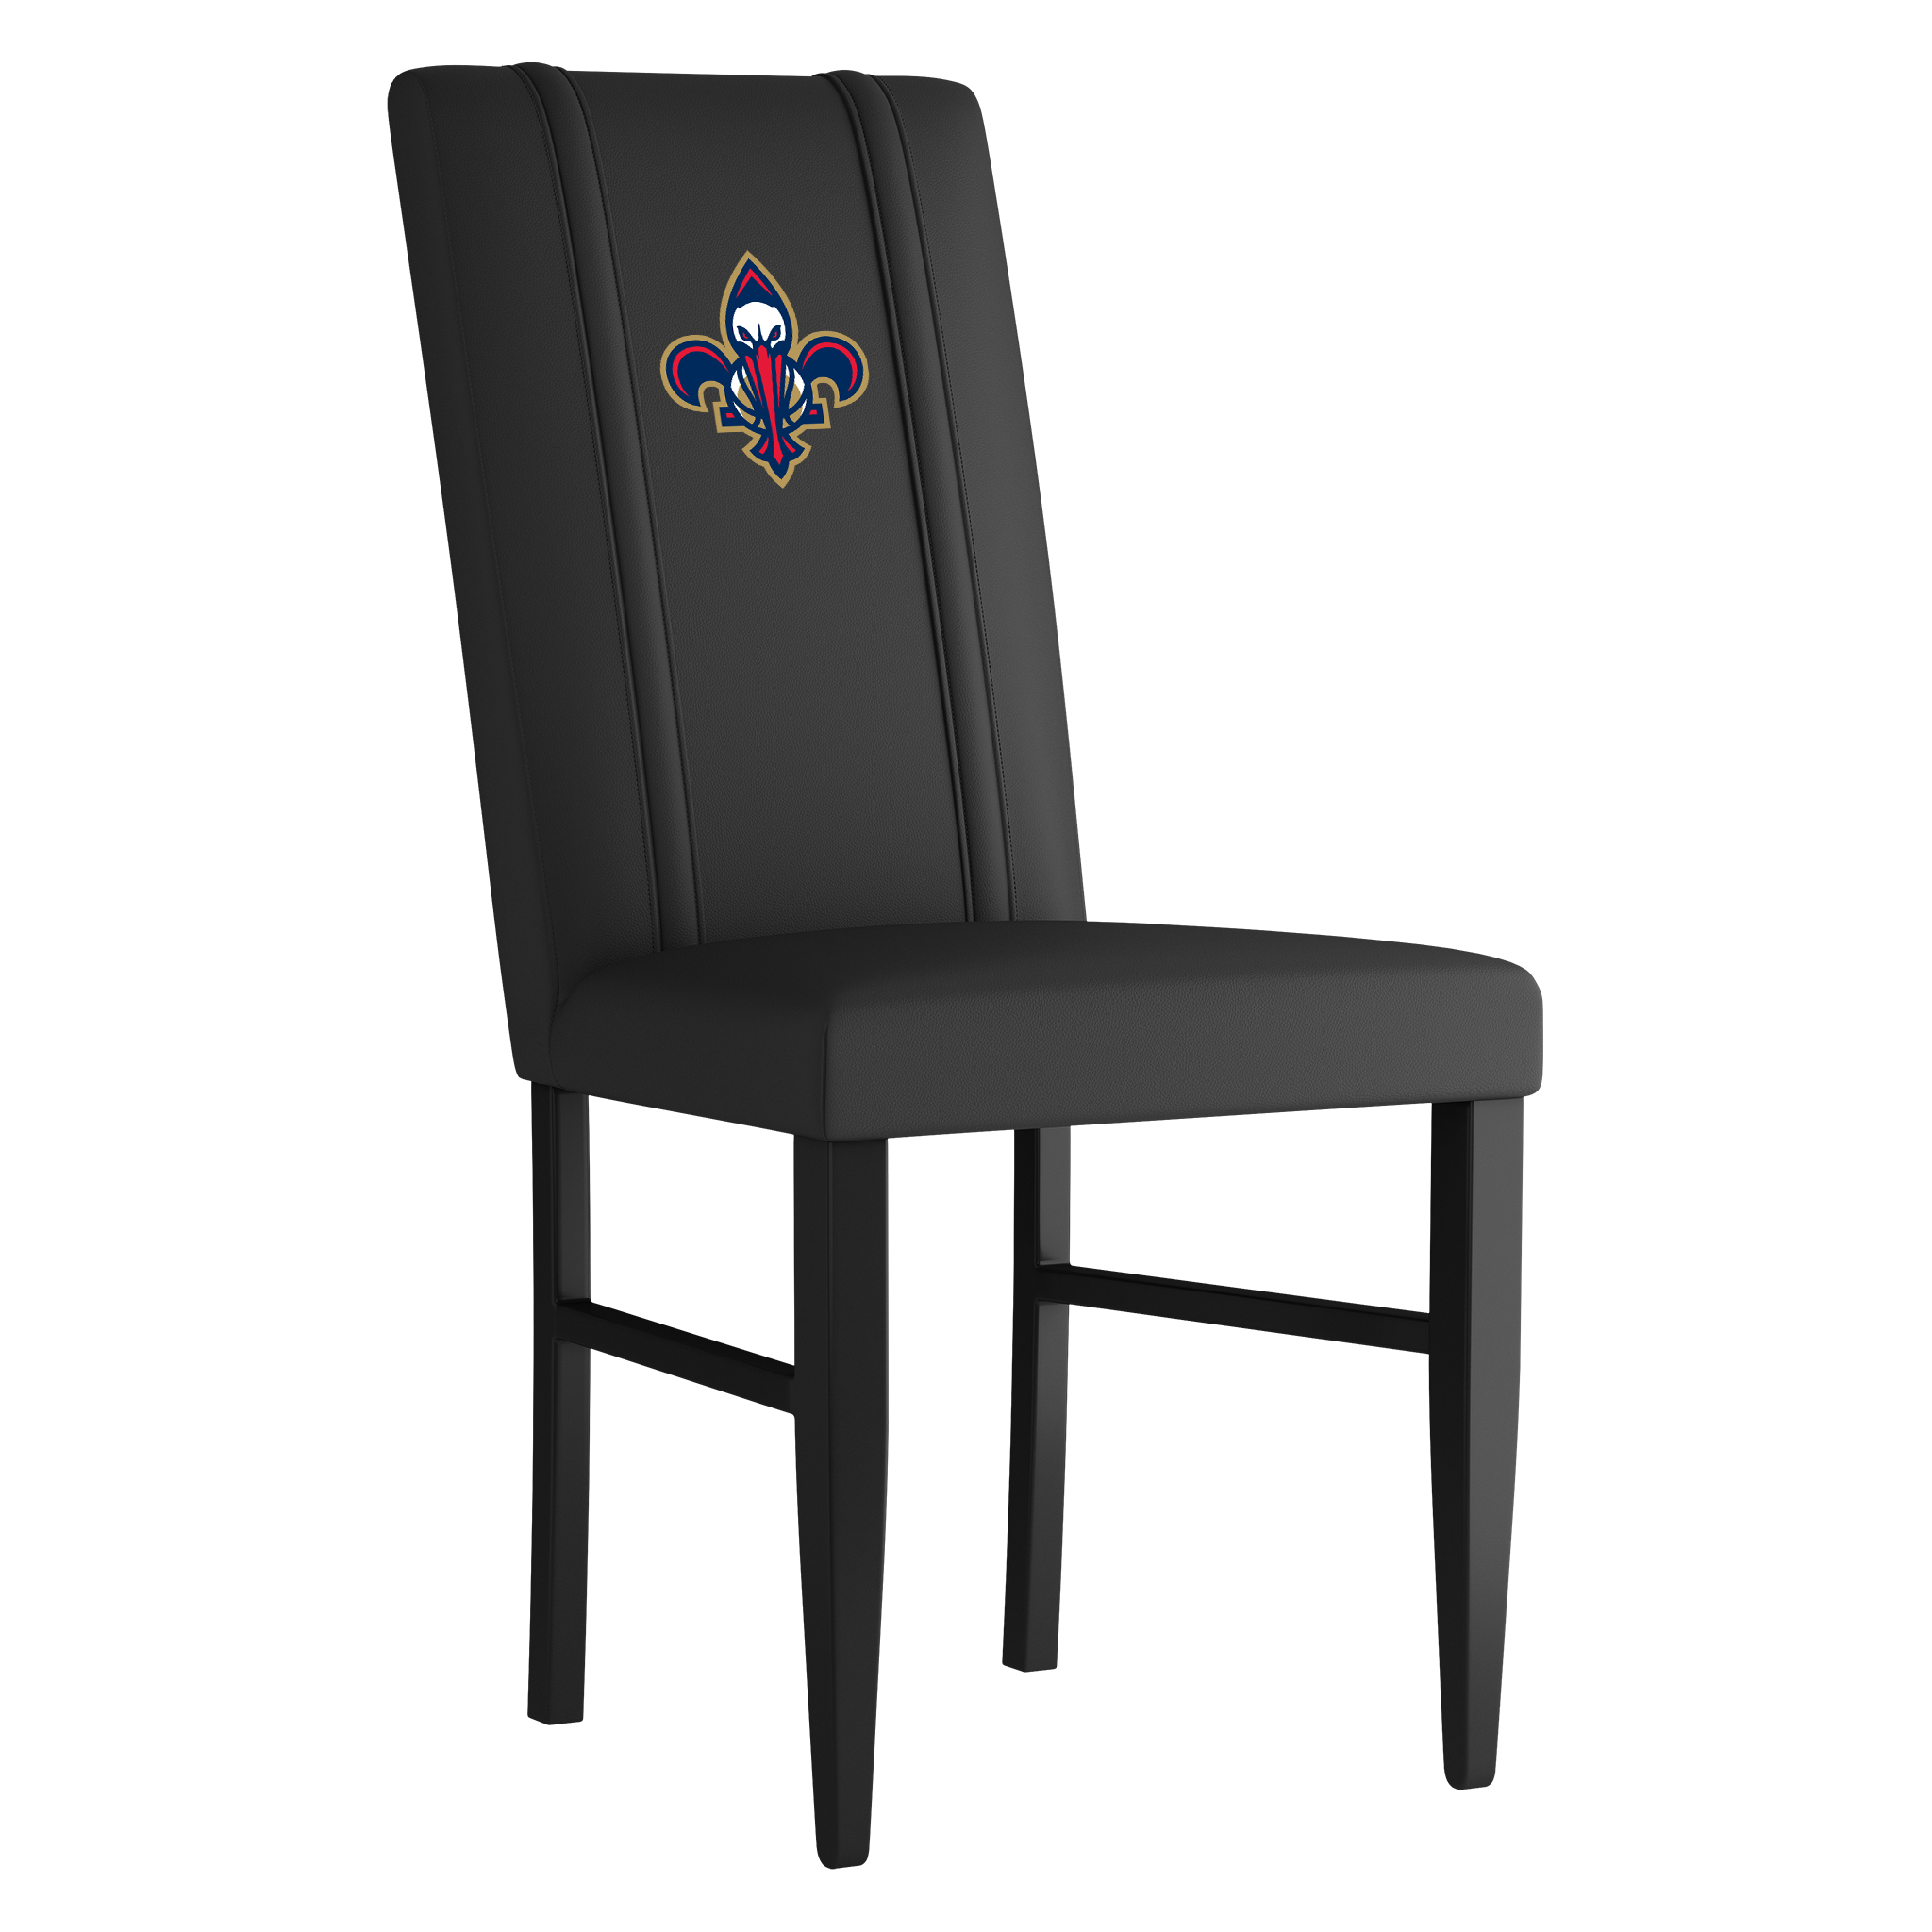 New Orleans Pelicans Side Chair 2000 With New Orleans Pelicans Secondary